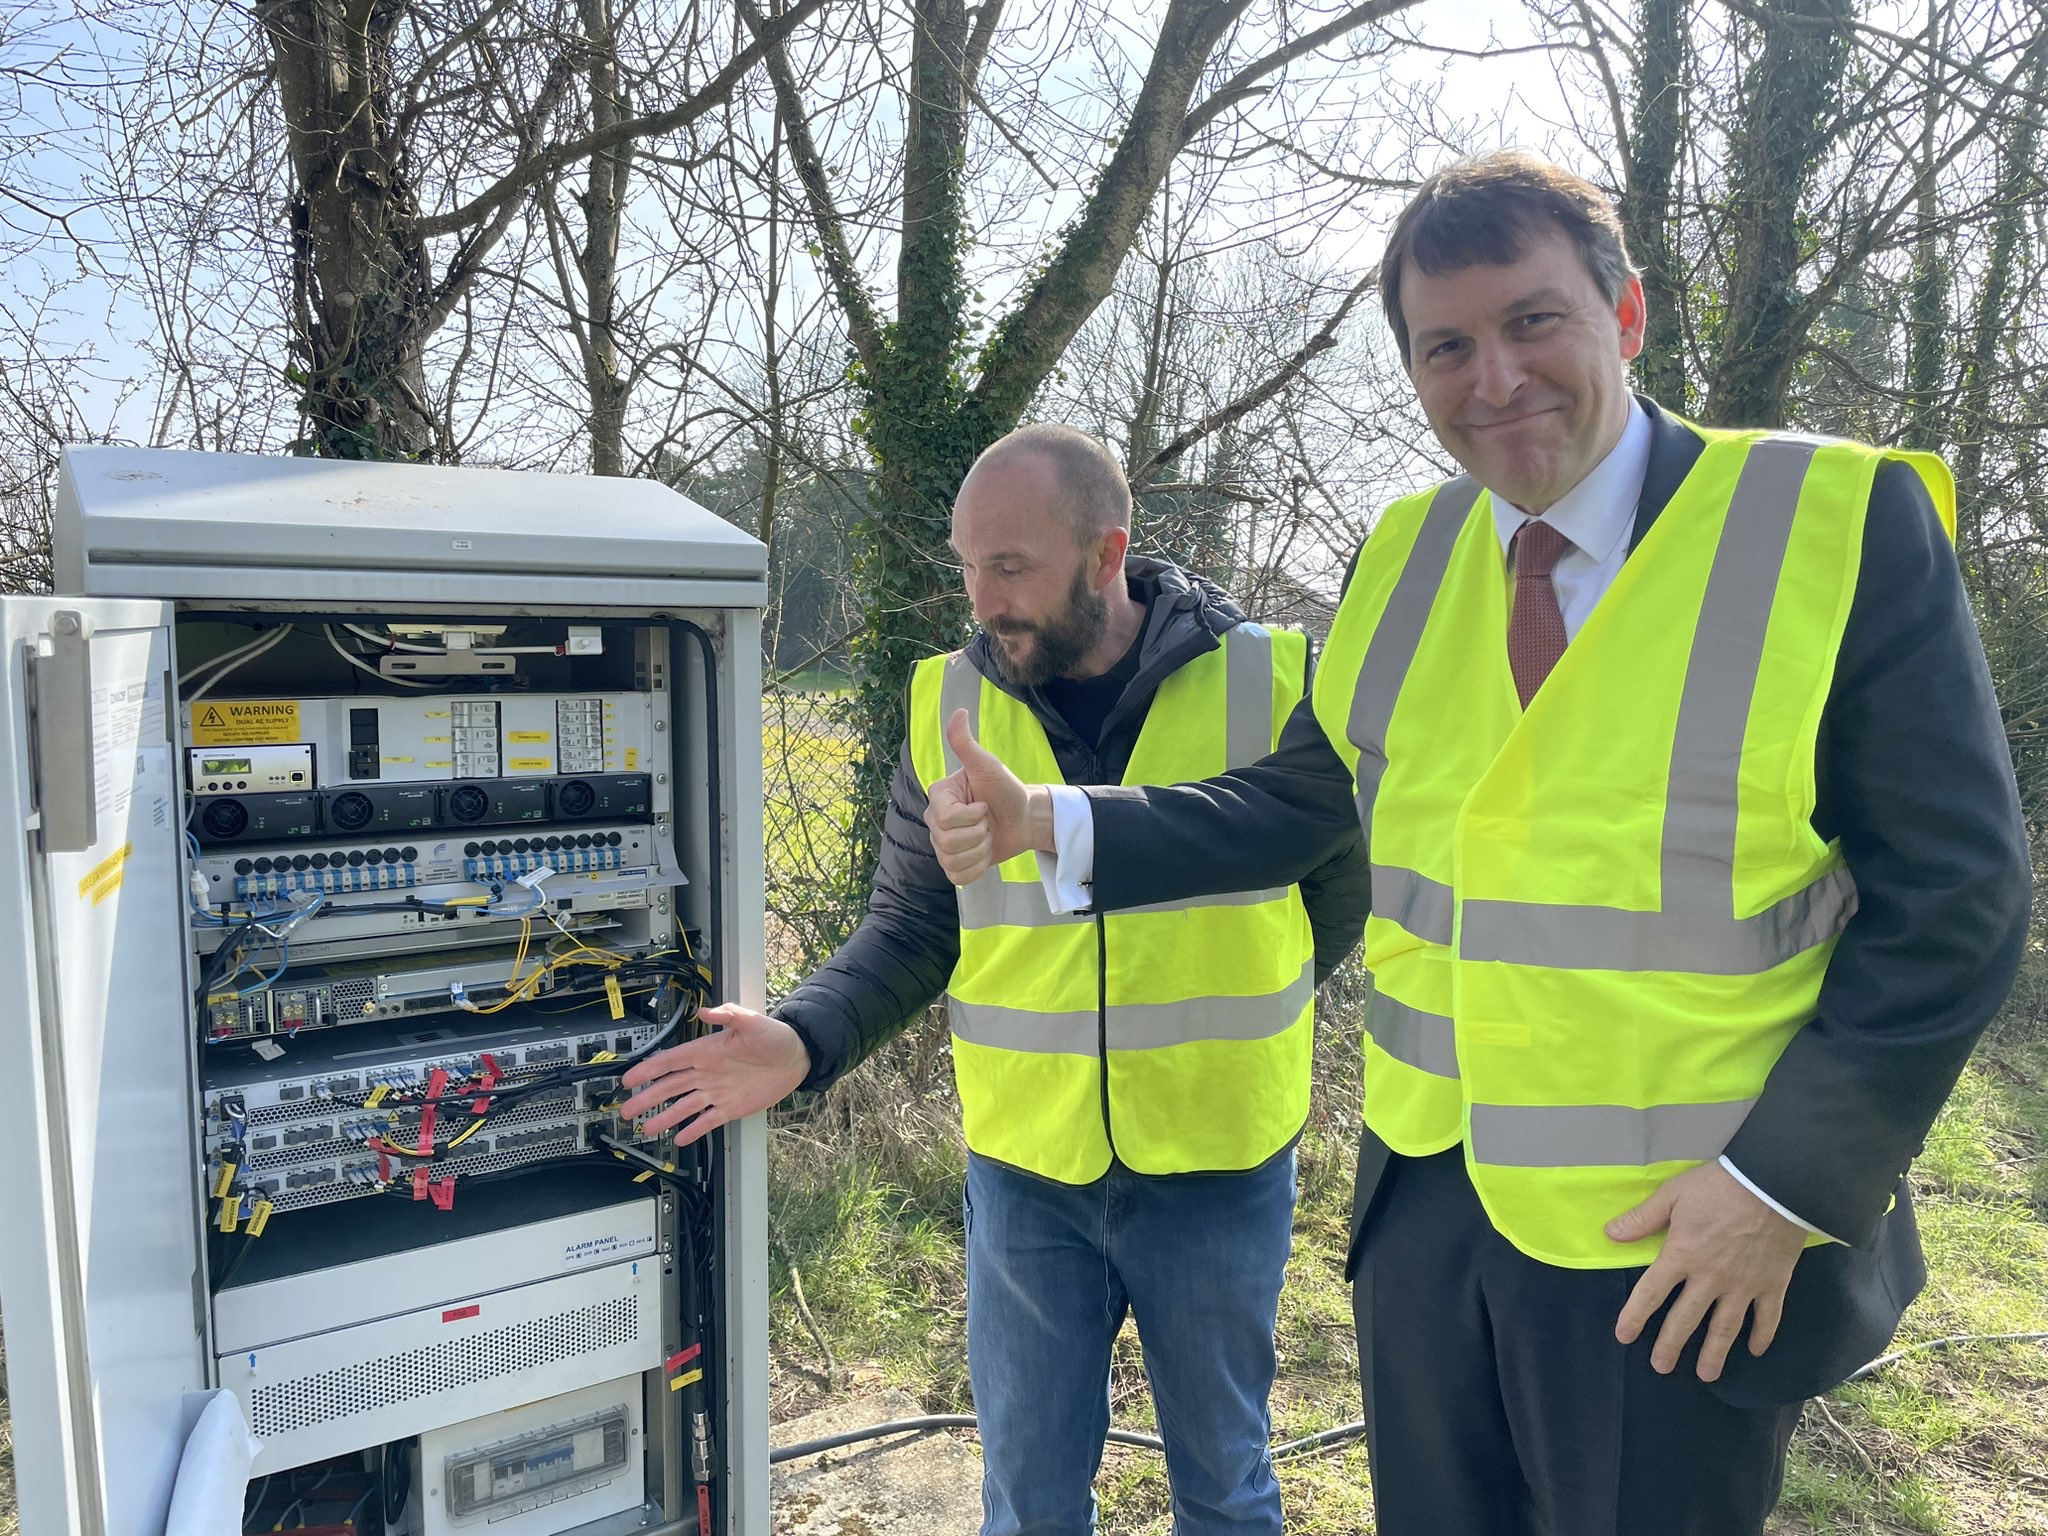 Stuart Fisher (L), a Vodafone UK Network Manager, John Glen MP (R). Fisher shows Glen the computer and equipment cabinet for the Winterslow Vodafone 4G mast.